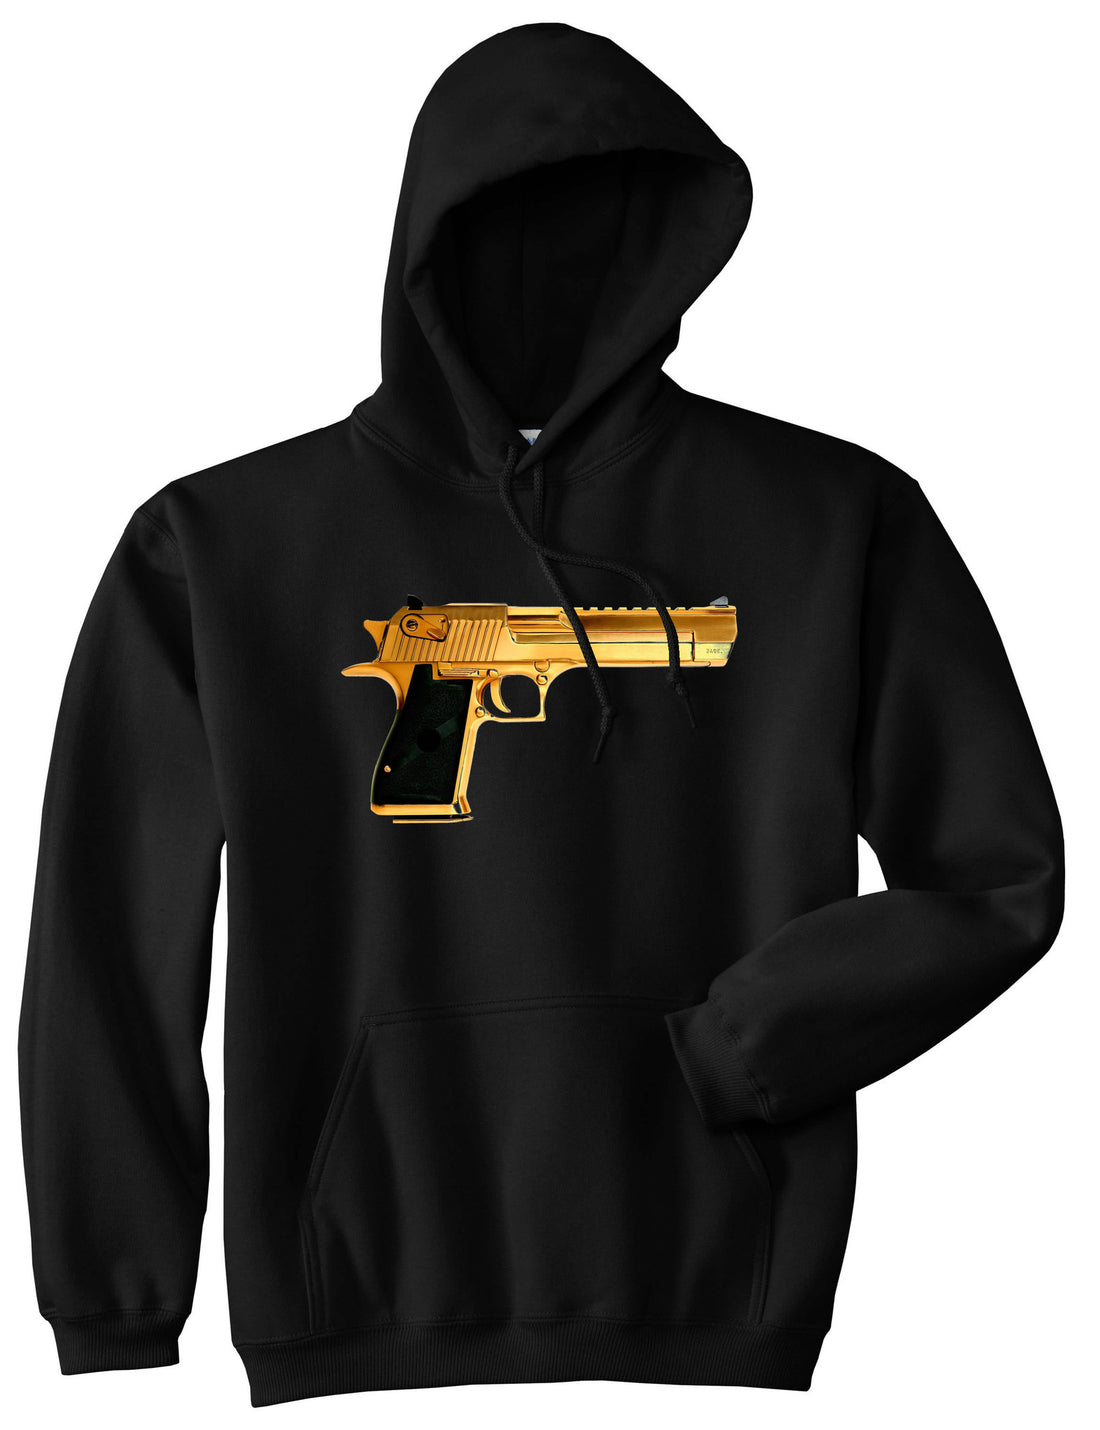 Gold Gun 9mm Revolver Chrome 45 Boys Kids Pullover Hoodie Hoody In Black by Kings Of NY